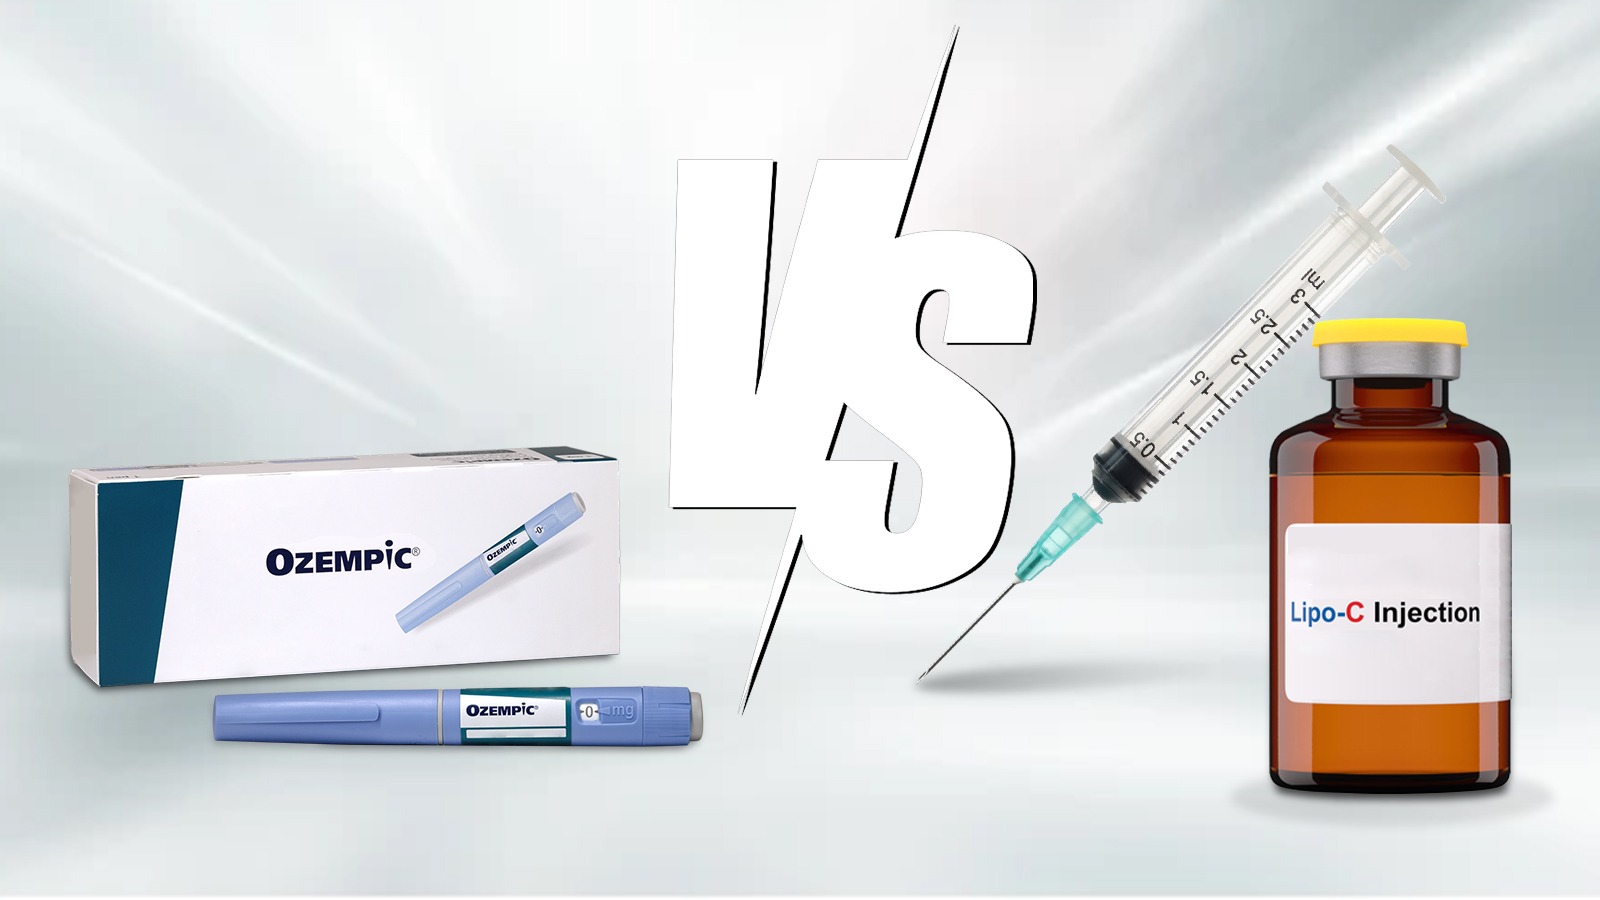 Ozempic® (Semaglutide) Injections vs. Lipotropic (Lipo Shots): Which is the Safer Choice? - AZ Laser Studio & Medspa